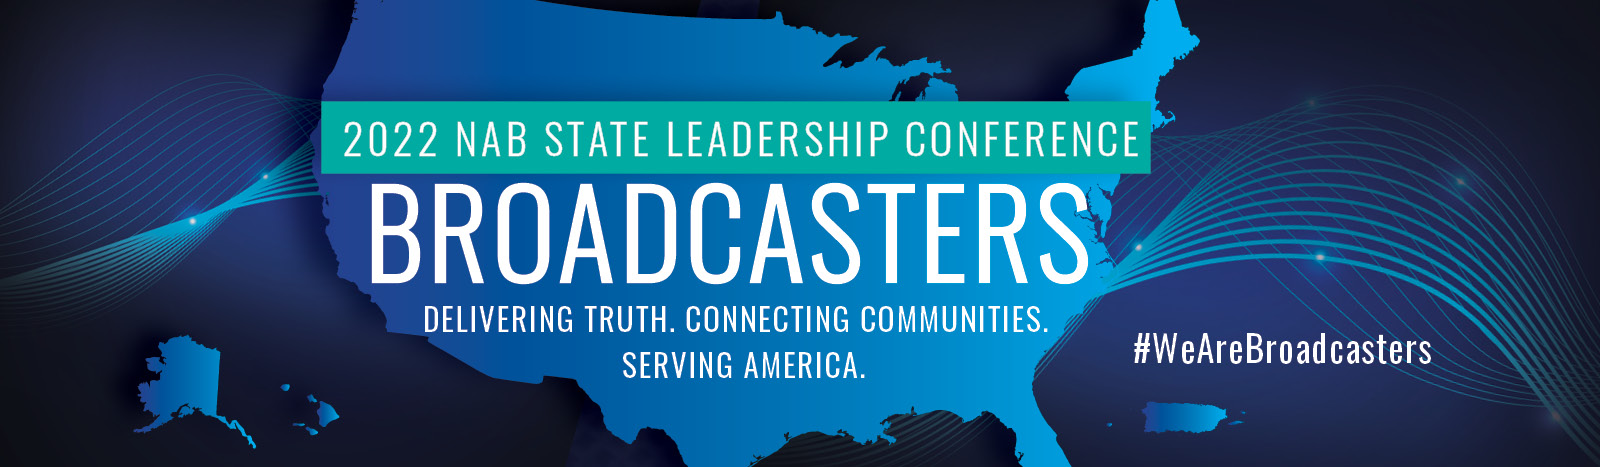 2022 NAB State Leadership Conference